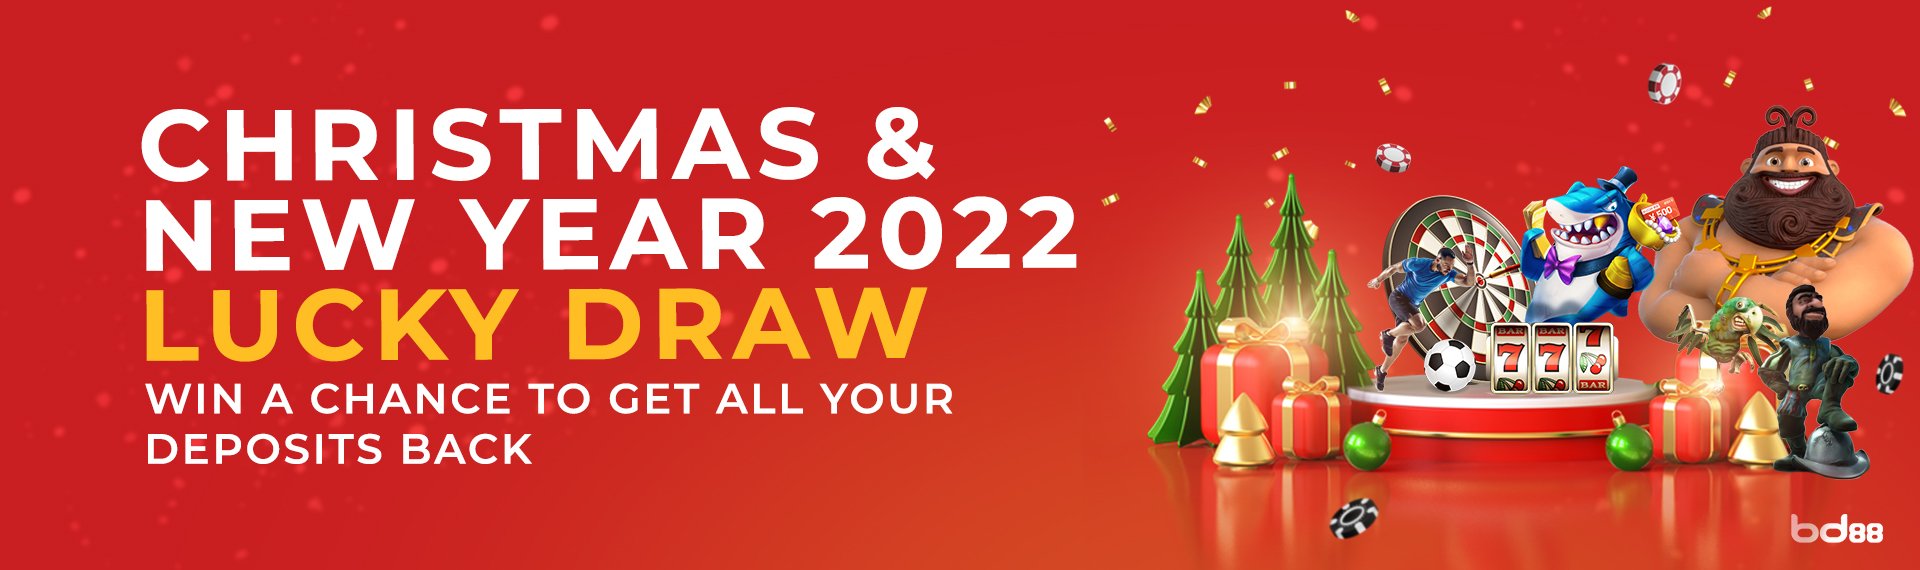 christmas-new-year-lucky-draw